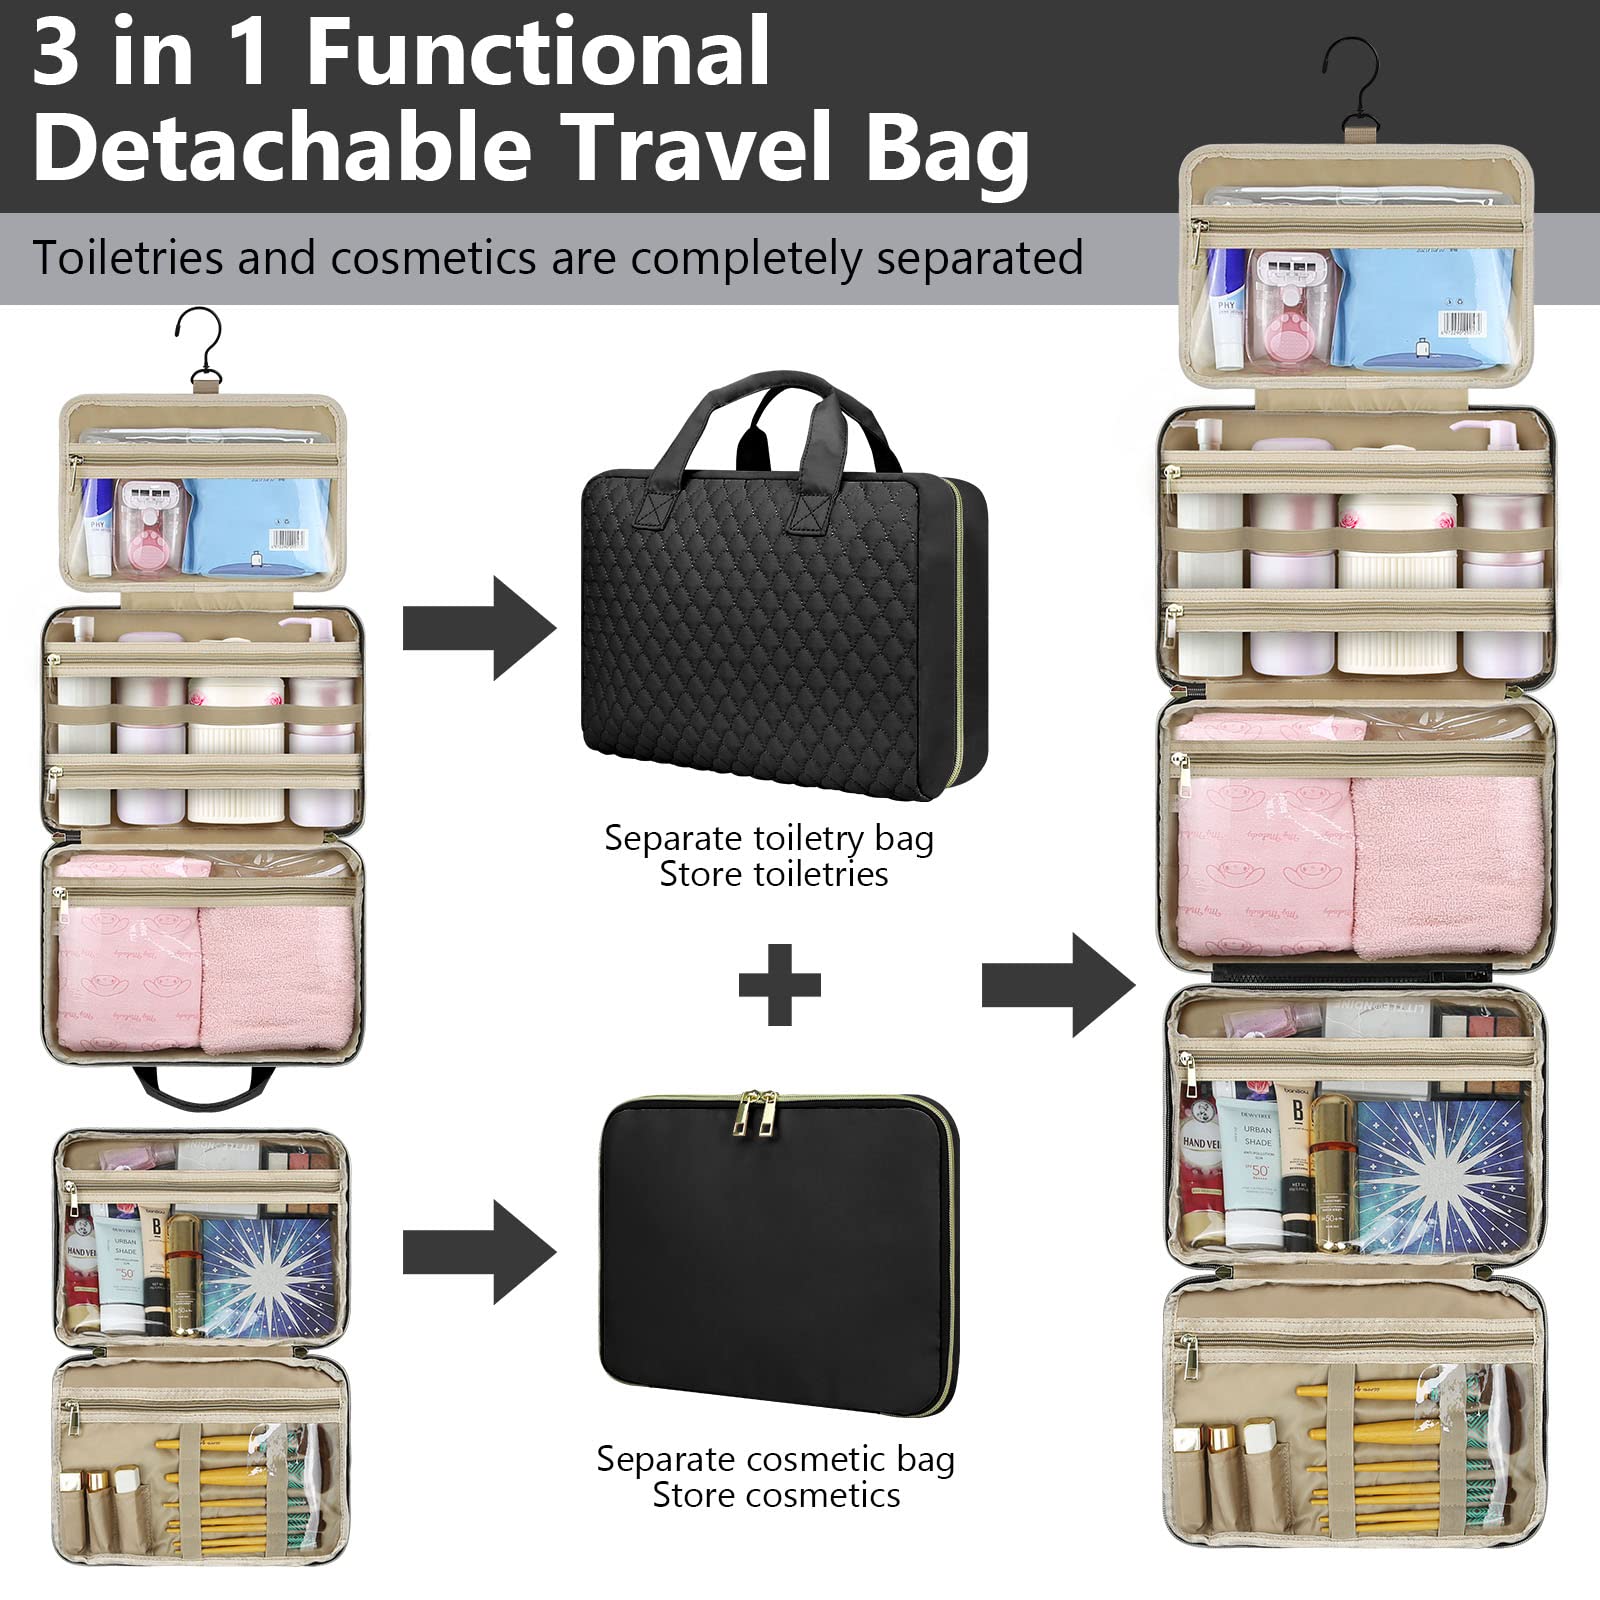 3-In-1 Detachable Hanging Travel Toiletry Bag, Large Capacity 5 Sections Makeup Cosmetic Bag with Luggage Belt, Waterproof Clear Compartment, Full-Sized Travel Organizer for Women (Black, Large)